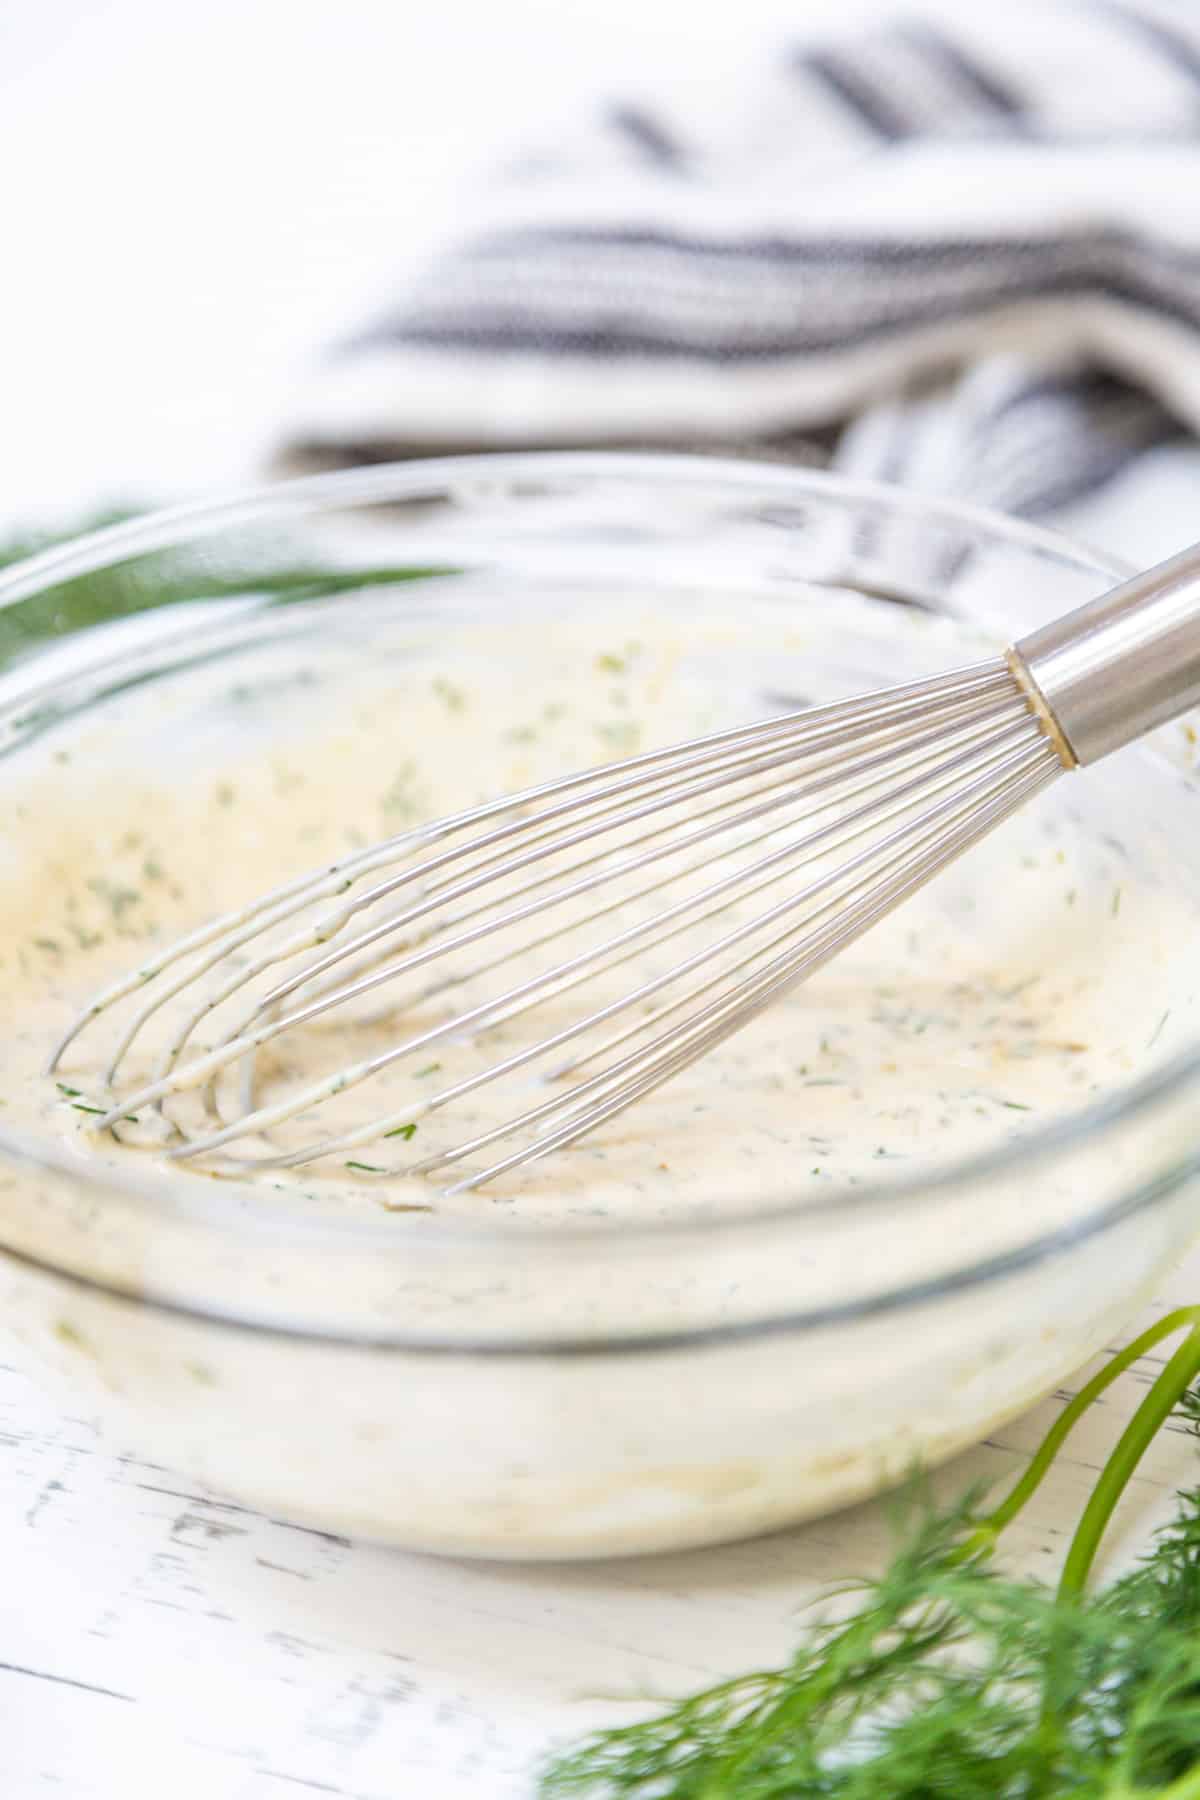 A clear glass bowl of tartar sauce with a whisk.